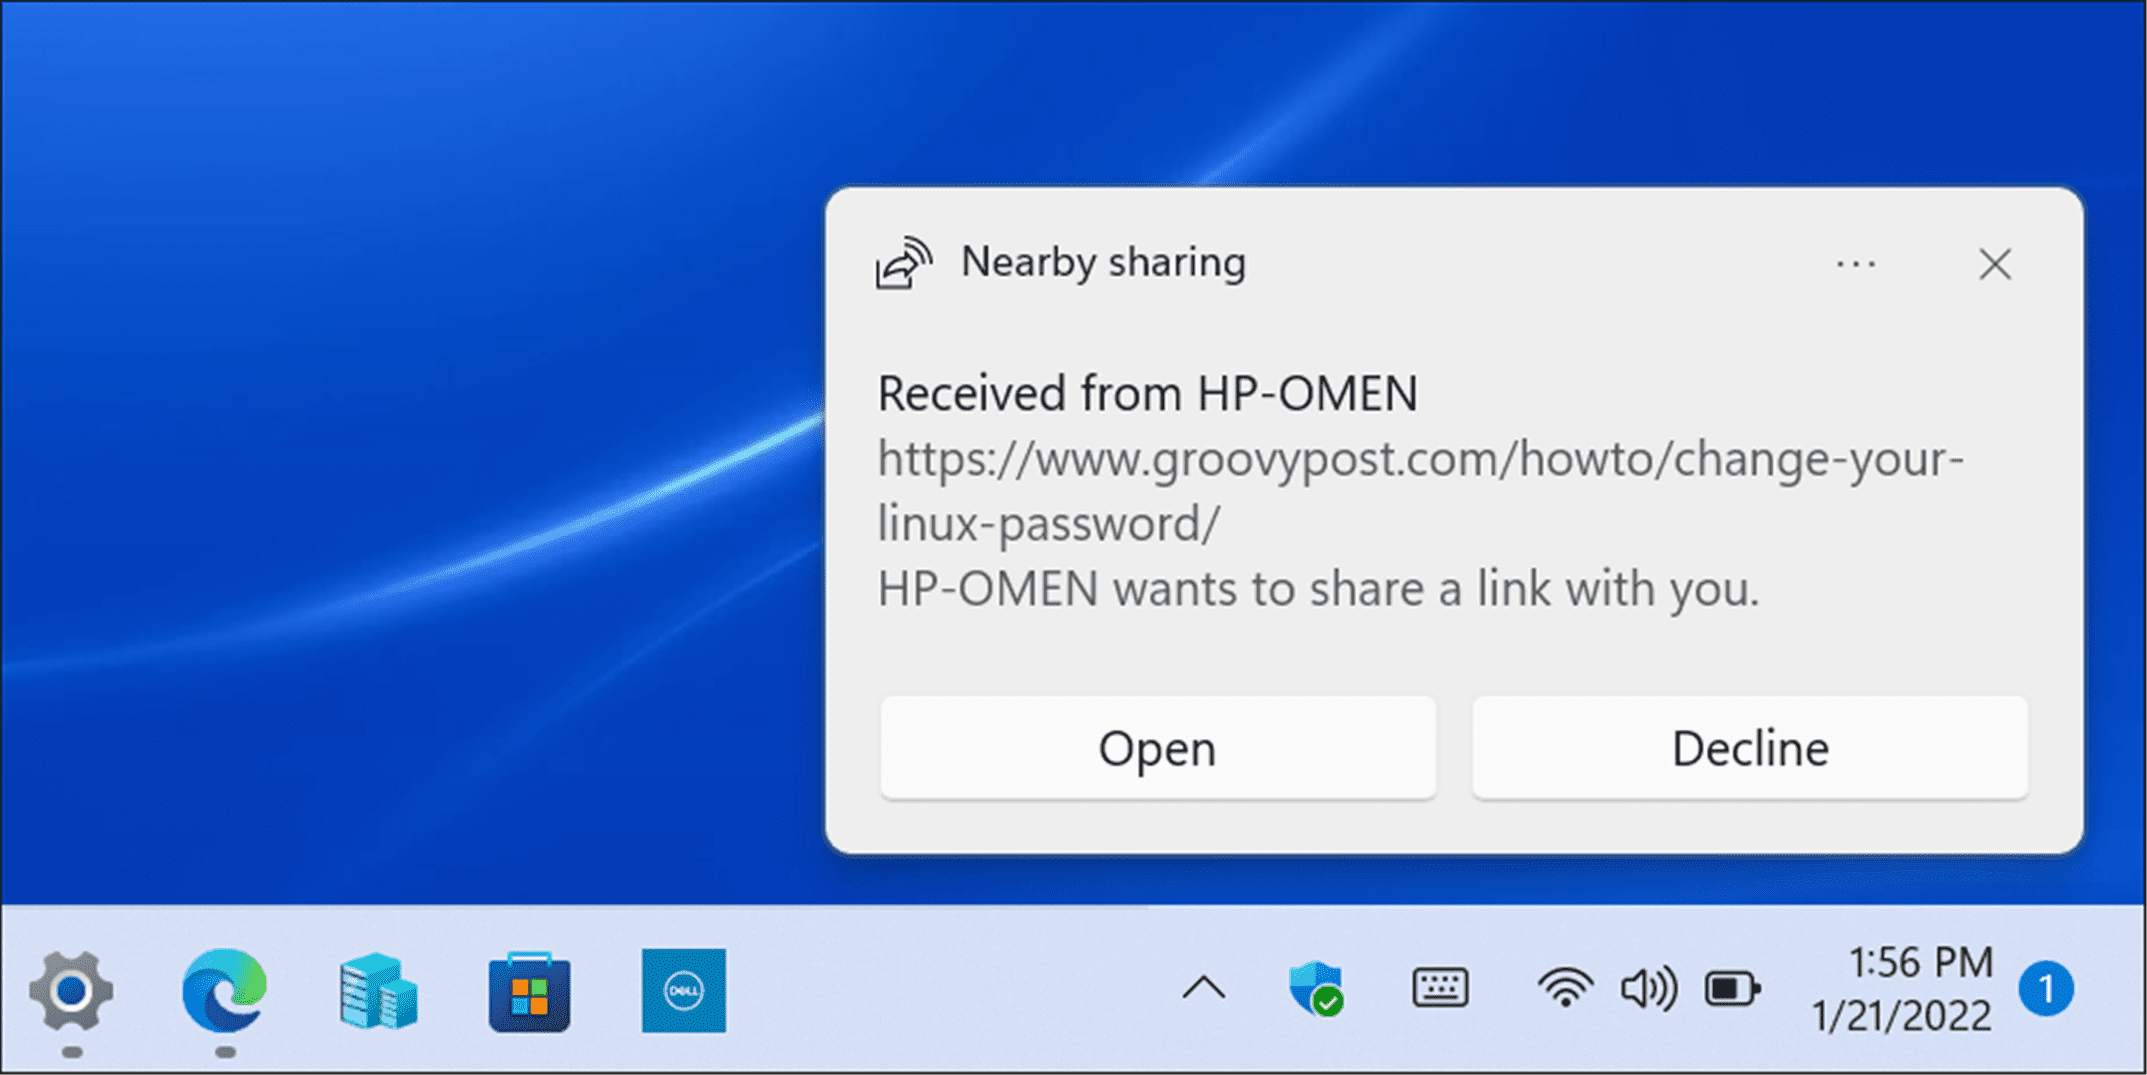 15-use-nearby-sharing-on-Windows-11-notification